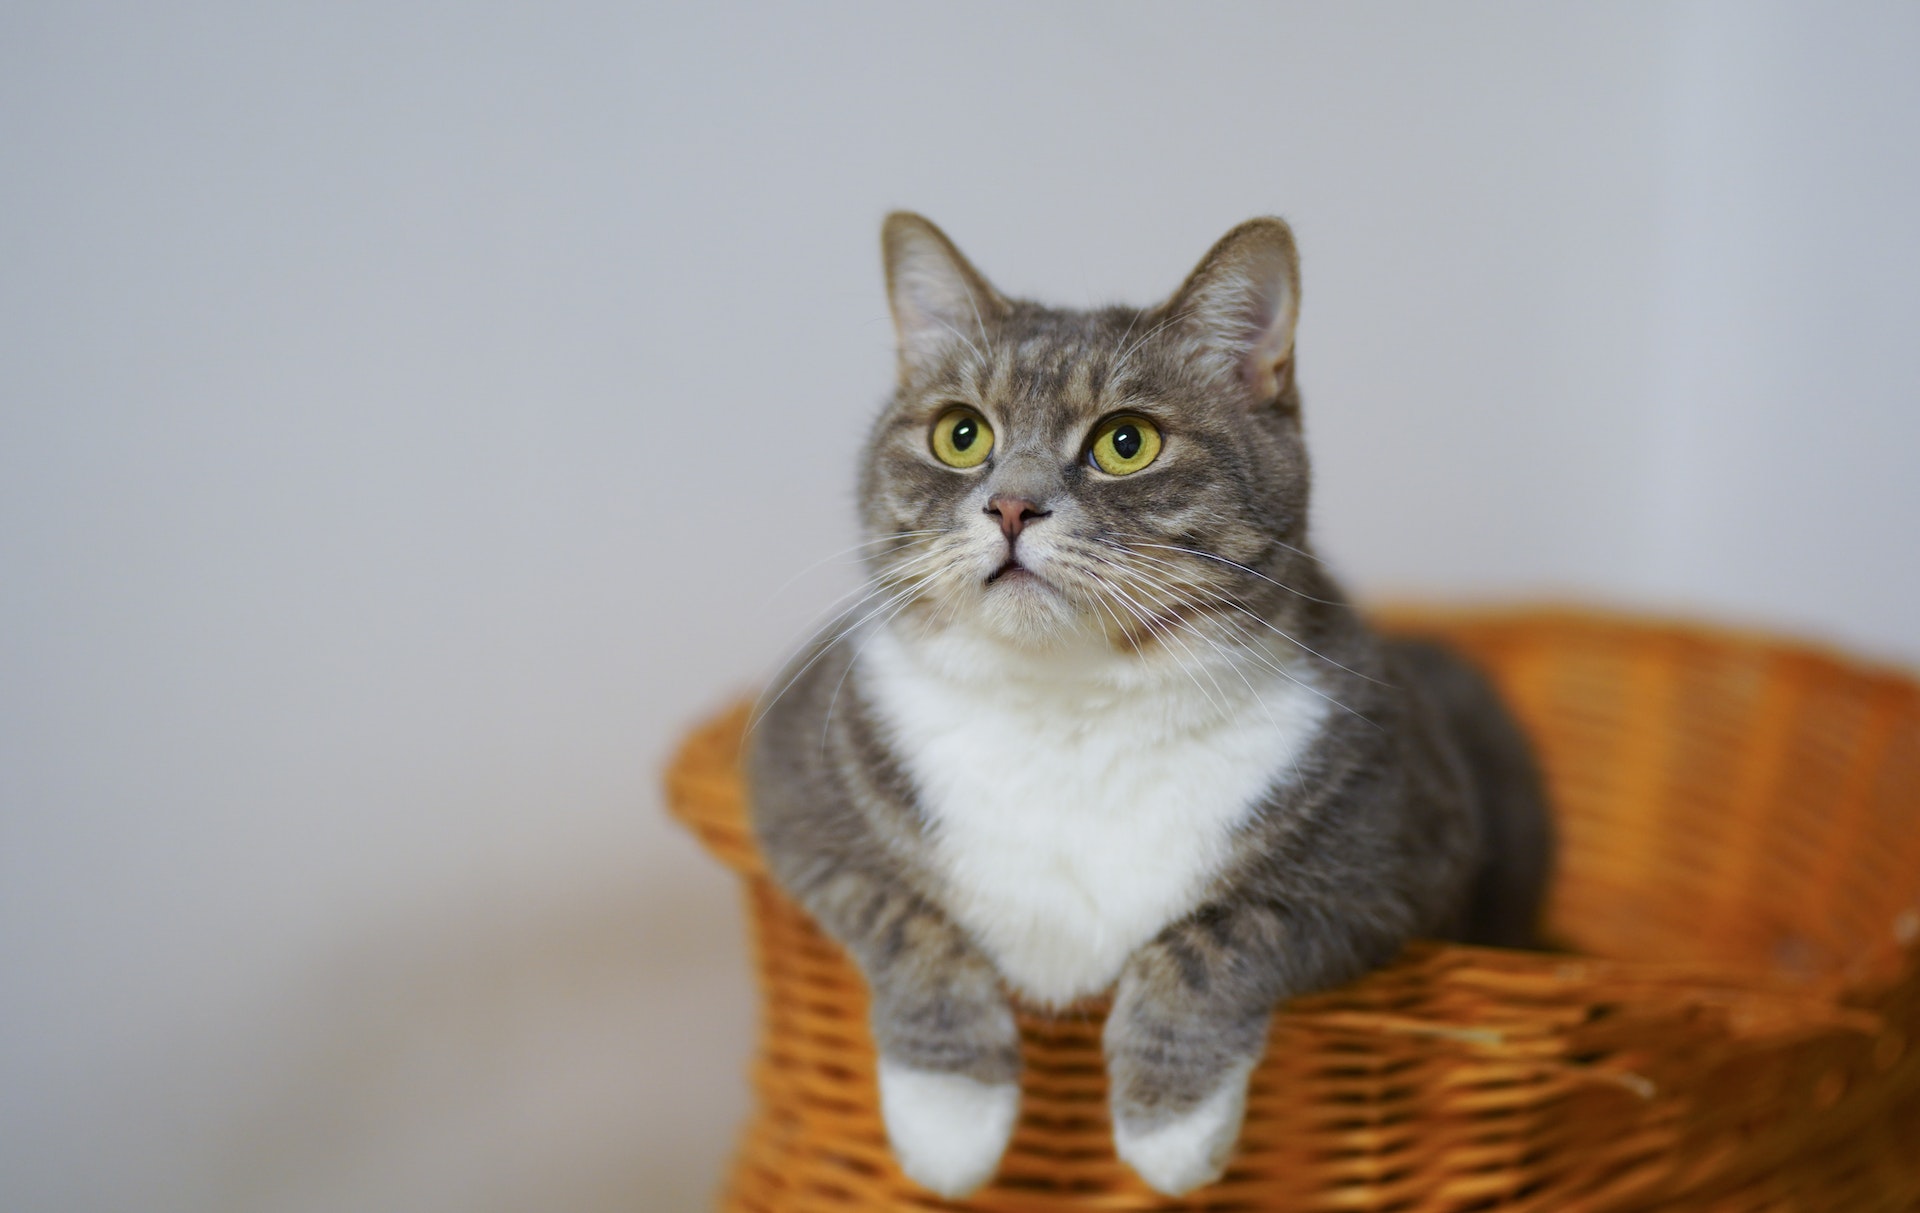 A cat sitting in a basket | Source: Pexels